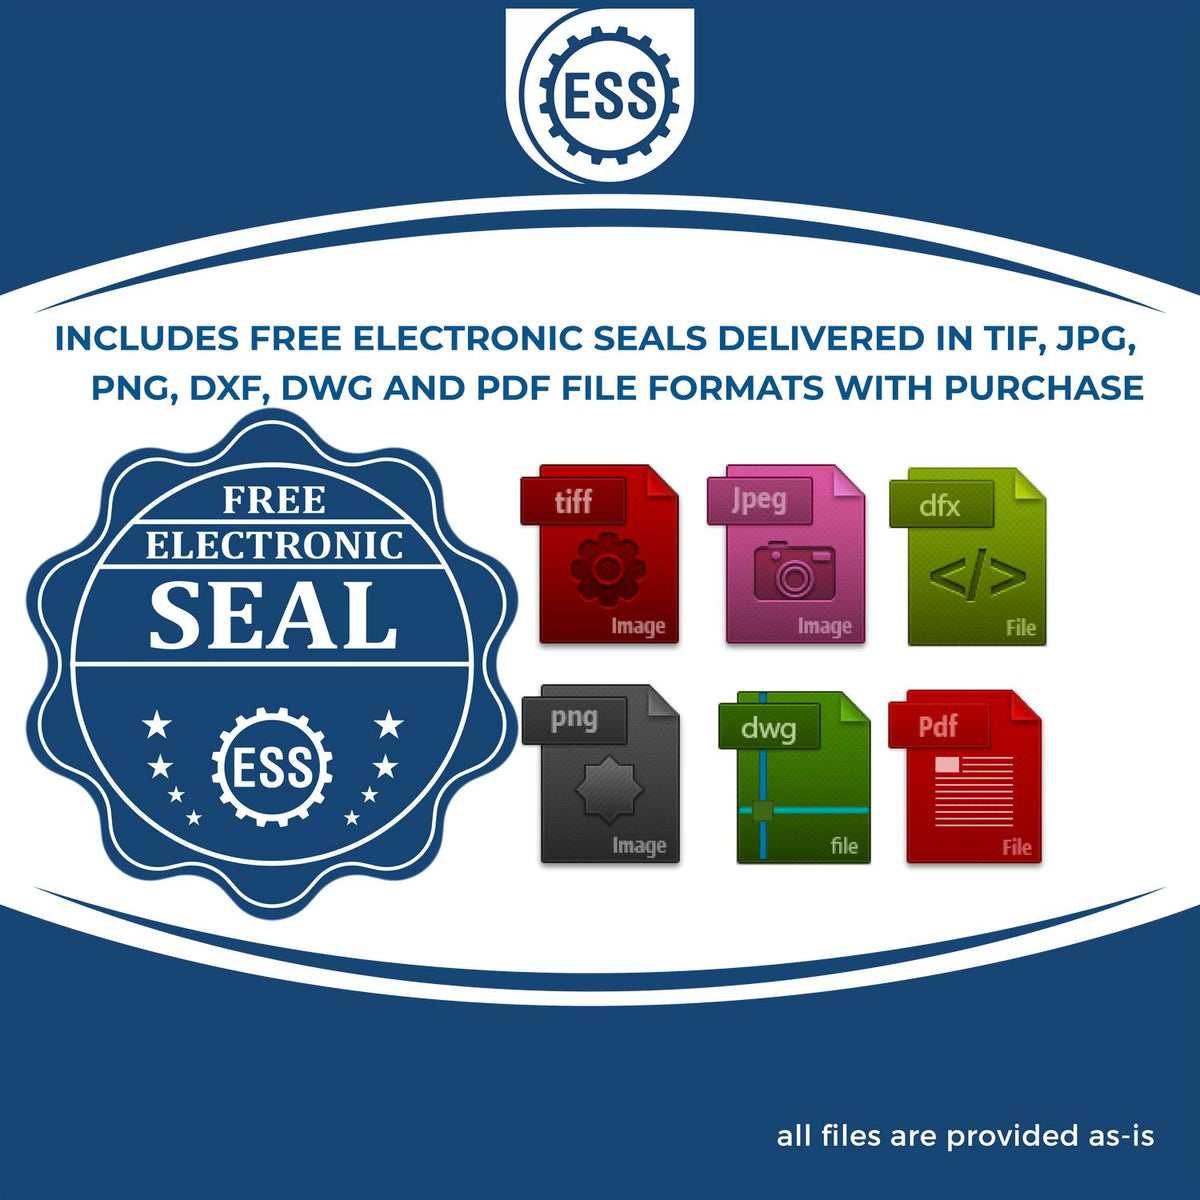 An infographic for the free electronic seal for the Hybrid Kansas Architect Seal illustrating the different file type icons such as DXF, DWG, TIF, JPG and PNG.